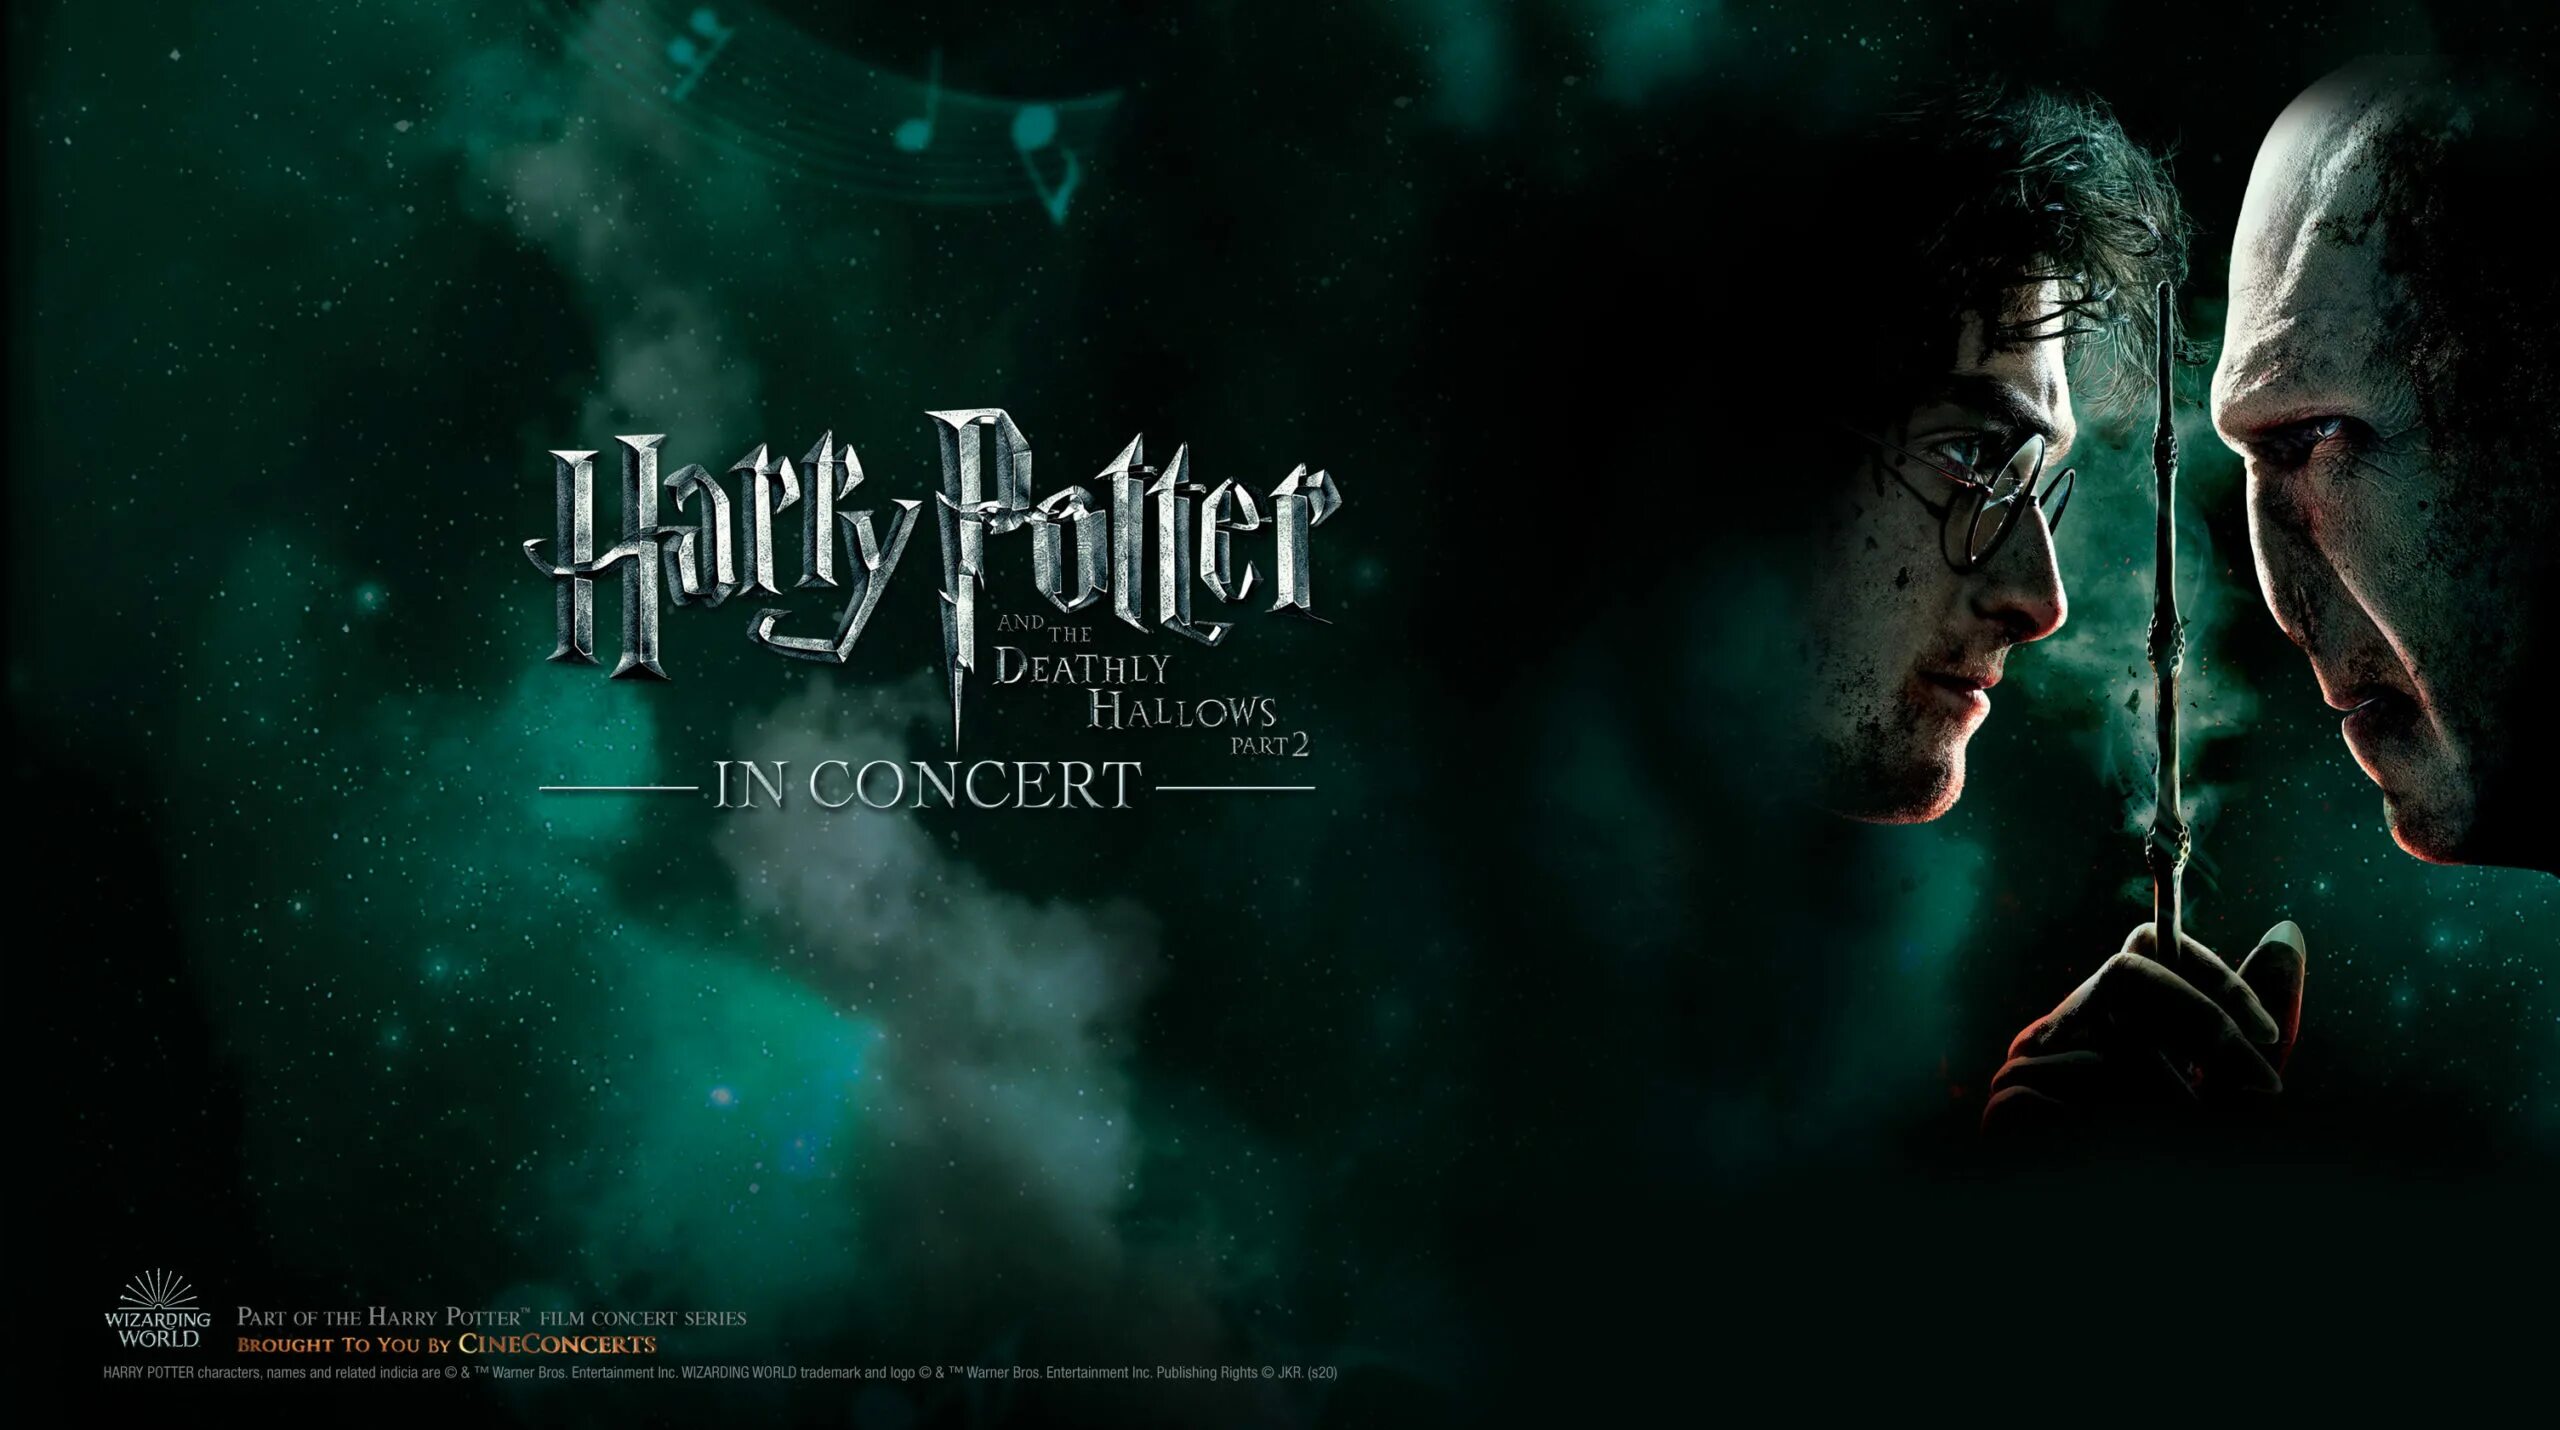 Harry Potter and Deathly Hallows 2. Deathly hallow part 1